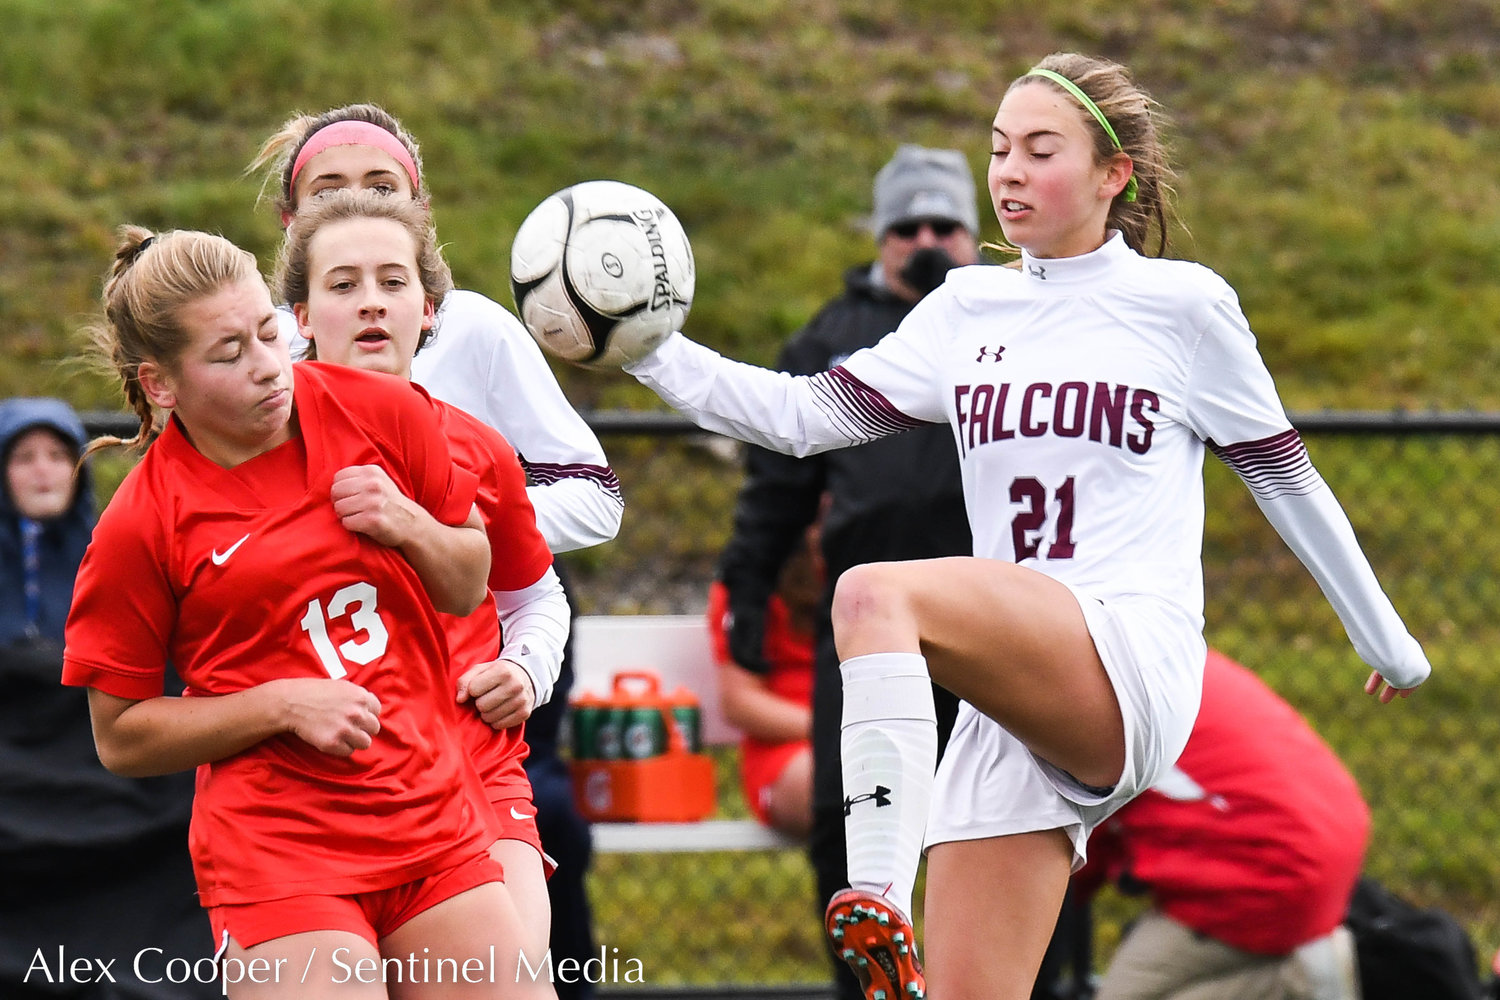 New Hartford player Willa Pratt (13) avoids getting hit as Albertus Magnus player Courtney Mclachlan (21) kicks the ball during the Class A state final on Sunday at Tompkins-Cortland Community College. The Spartans lost 3-1.